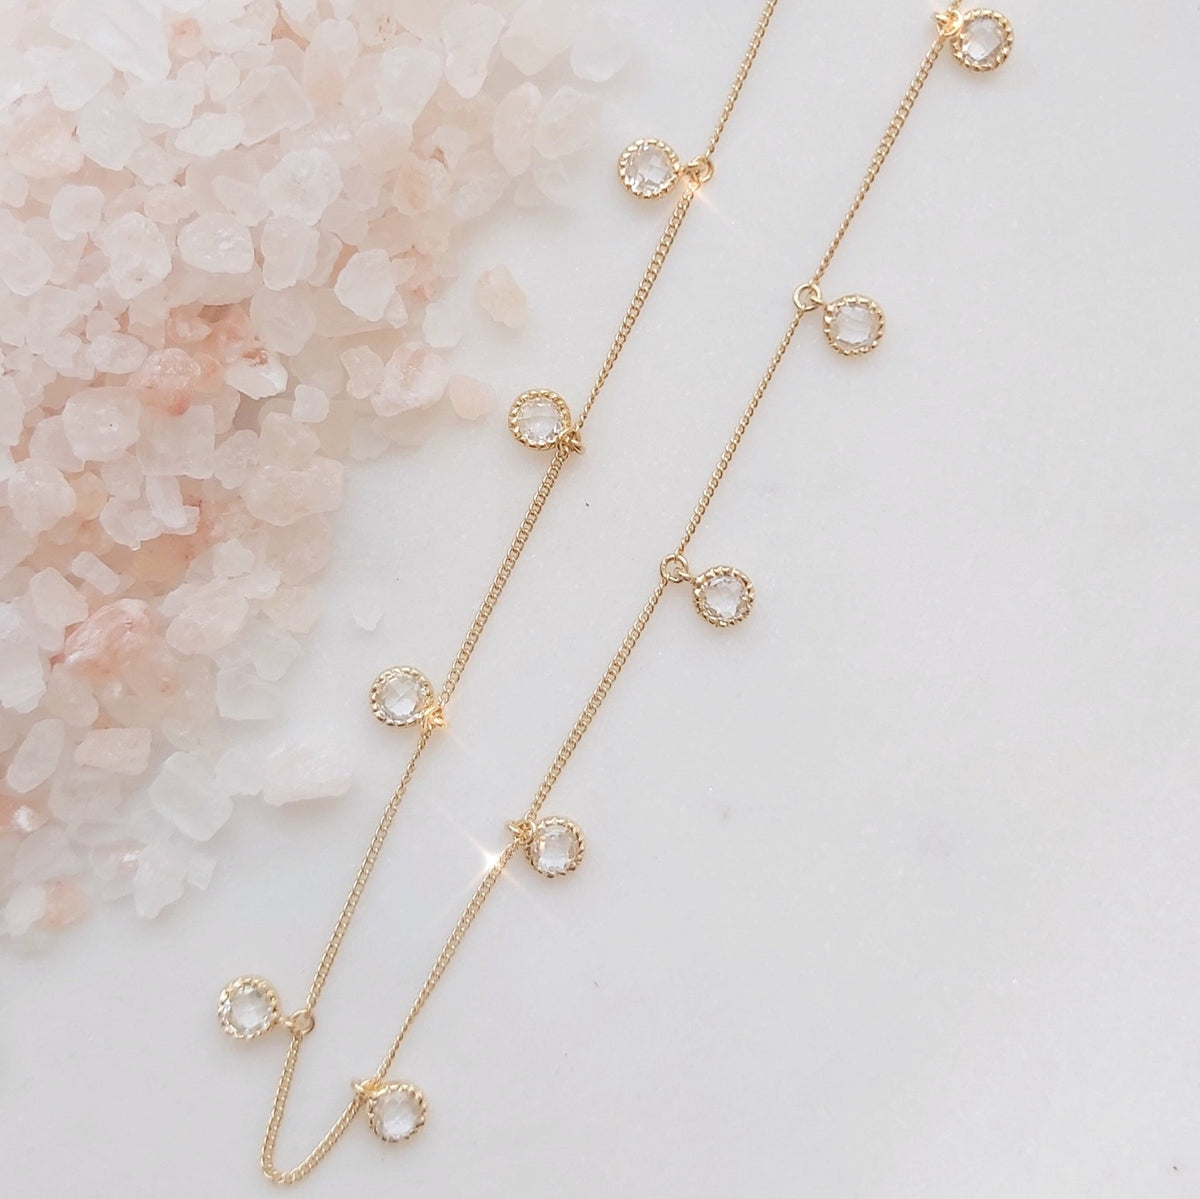 DAINTY LEGACY COLLAR NECKLACE - WHITE TOPAZ &amp; GOLD - SO PRETTY CARA COTTER